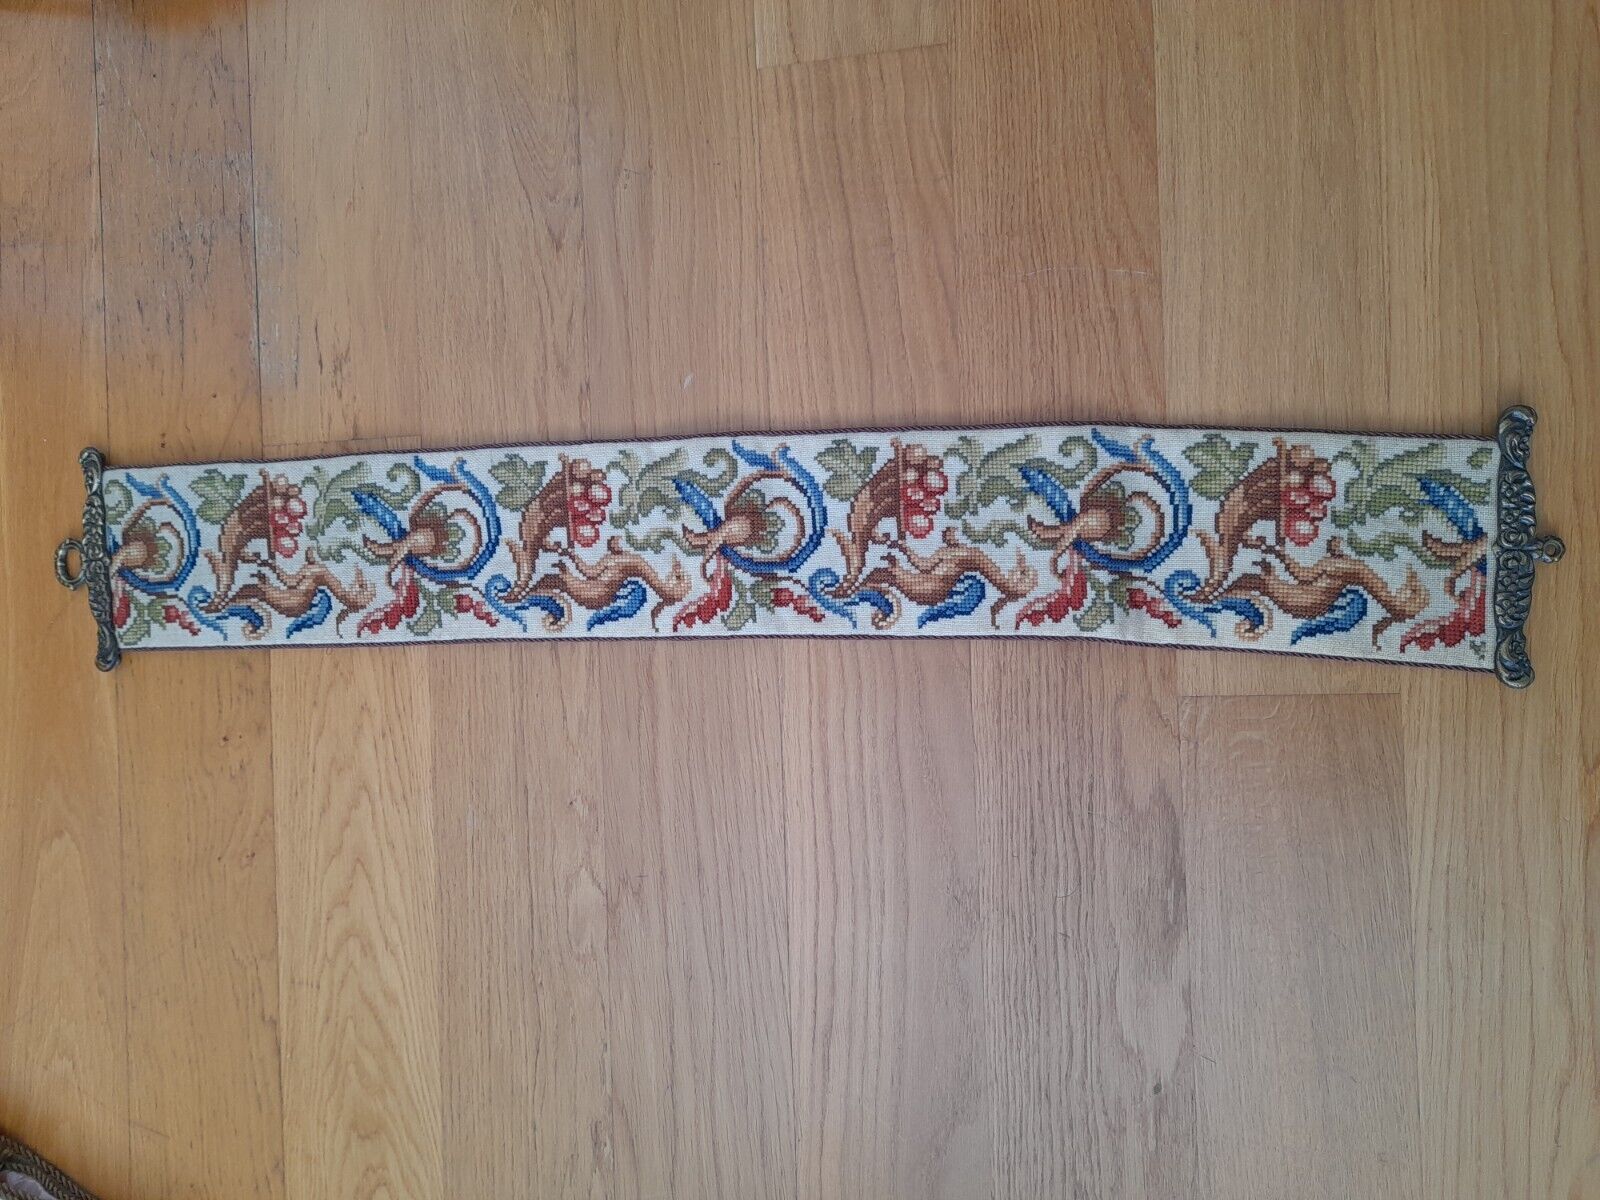 Antique Valuations: Vintage Tapestry Wall Hanging Doorpull, Preowned